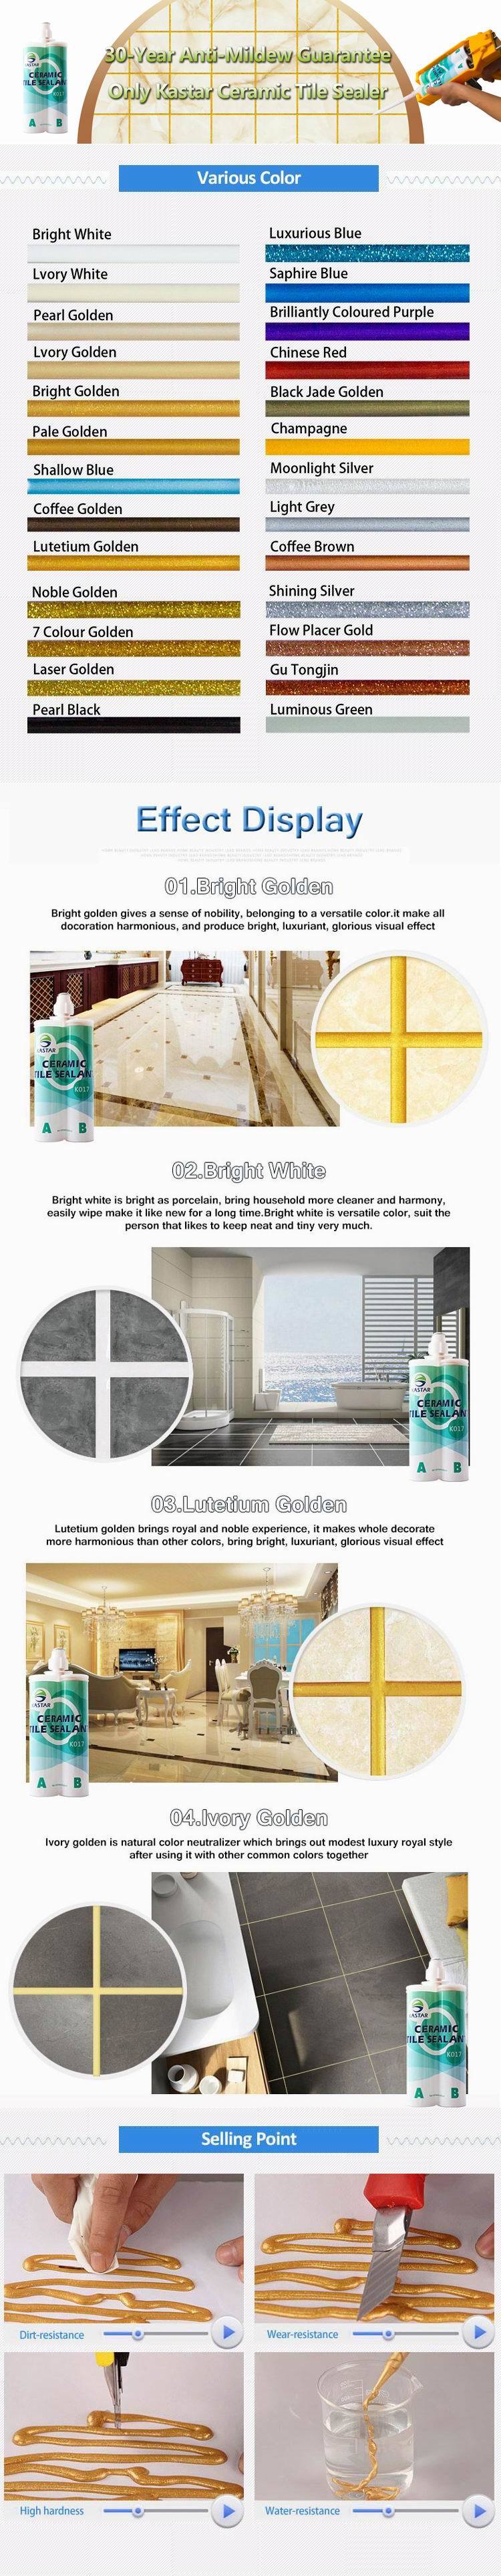 Environmental Epoxy Resin Tile Grout Durable Grout Sealant with Color Is Optional